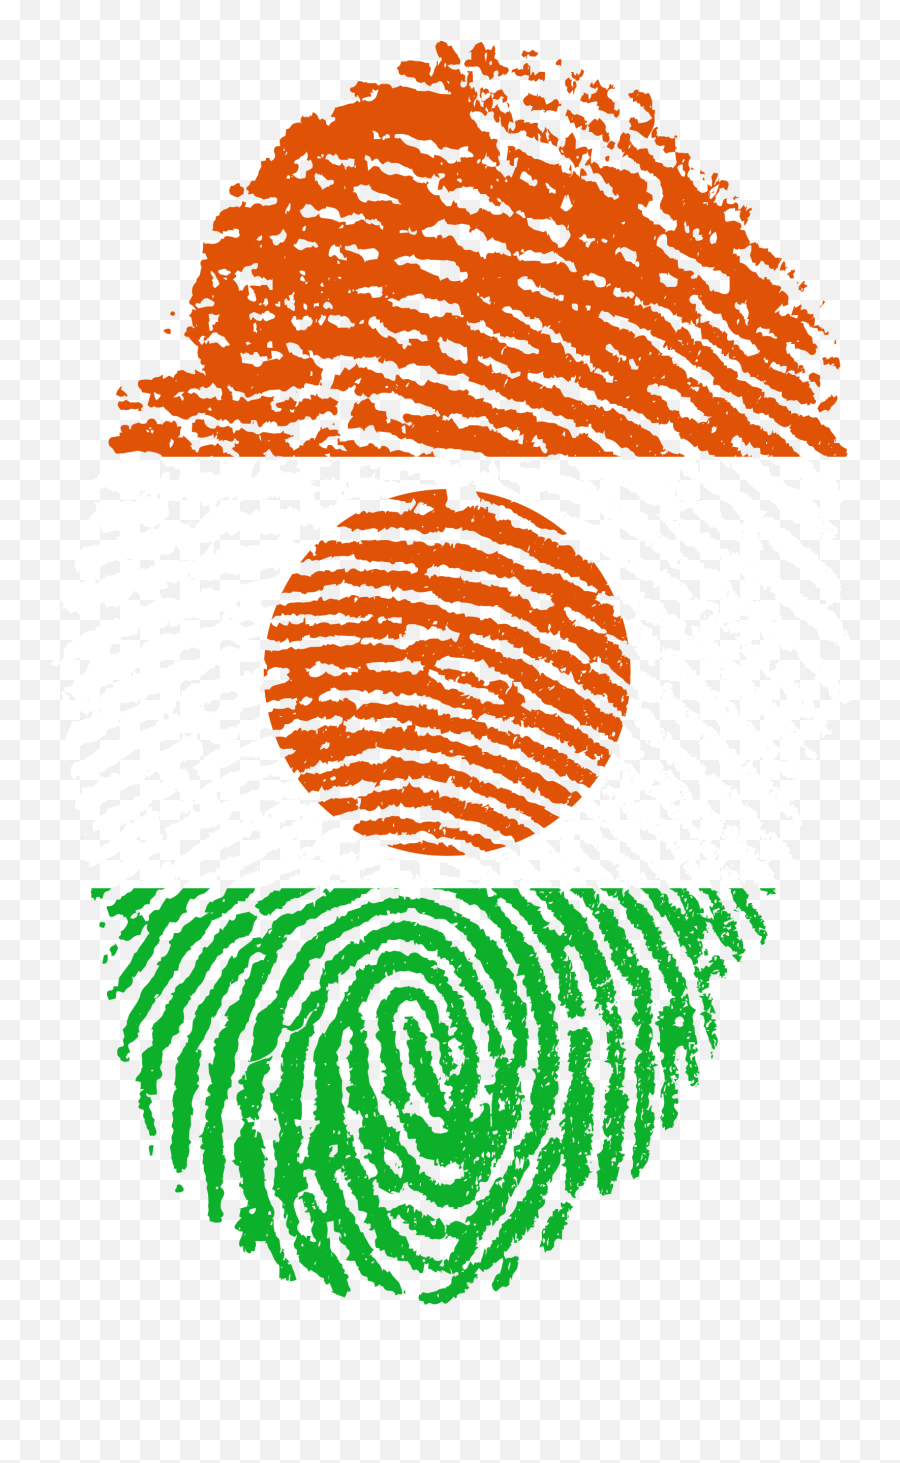 Fingerprint With The Image Of The Flag Of Nigeria Free Image Emoji,Nigerian Flag Png